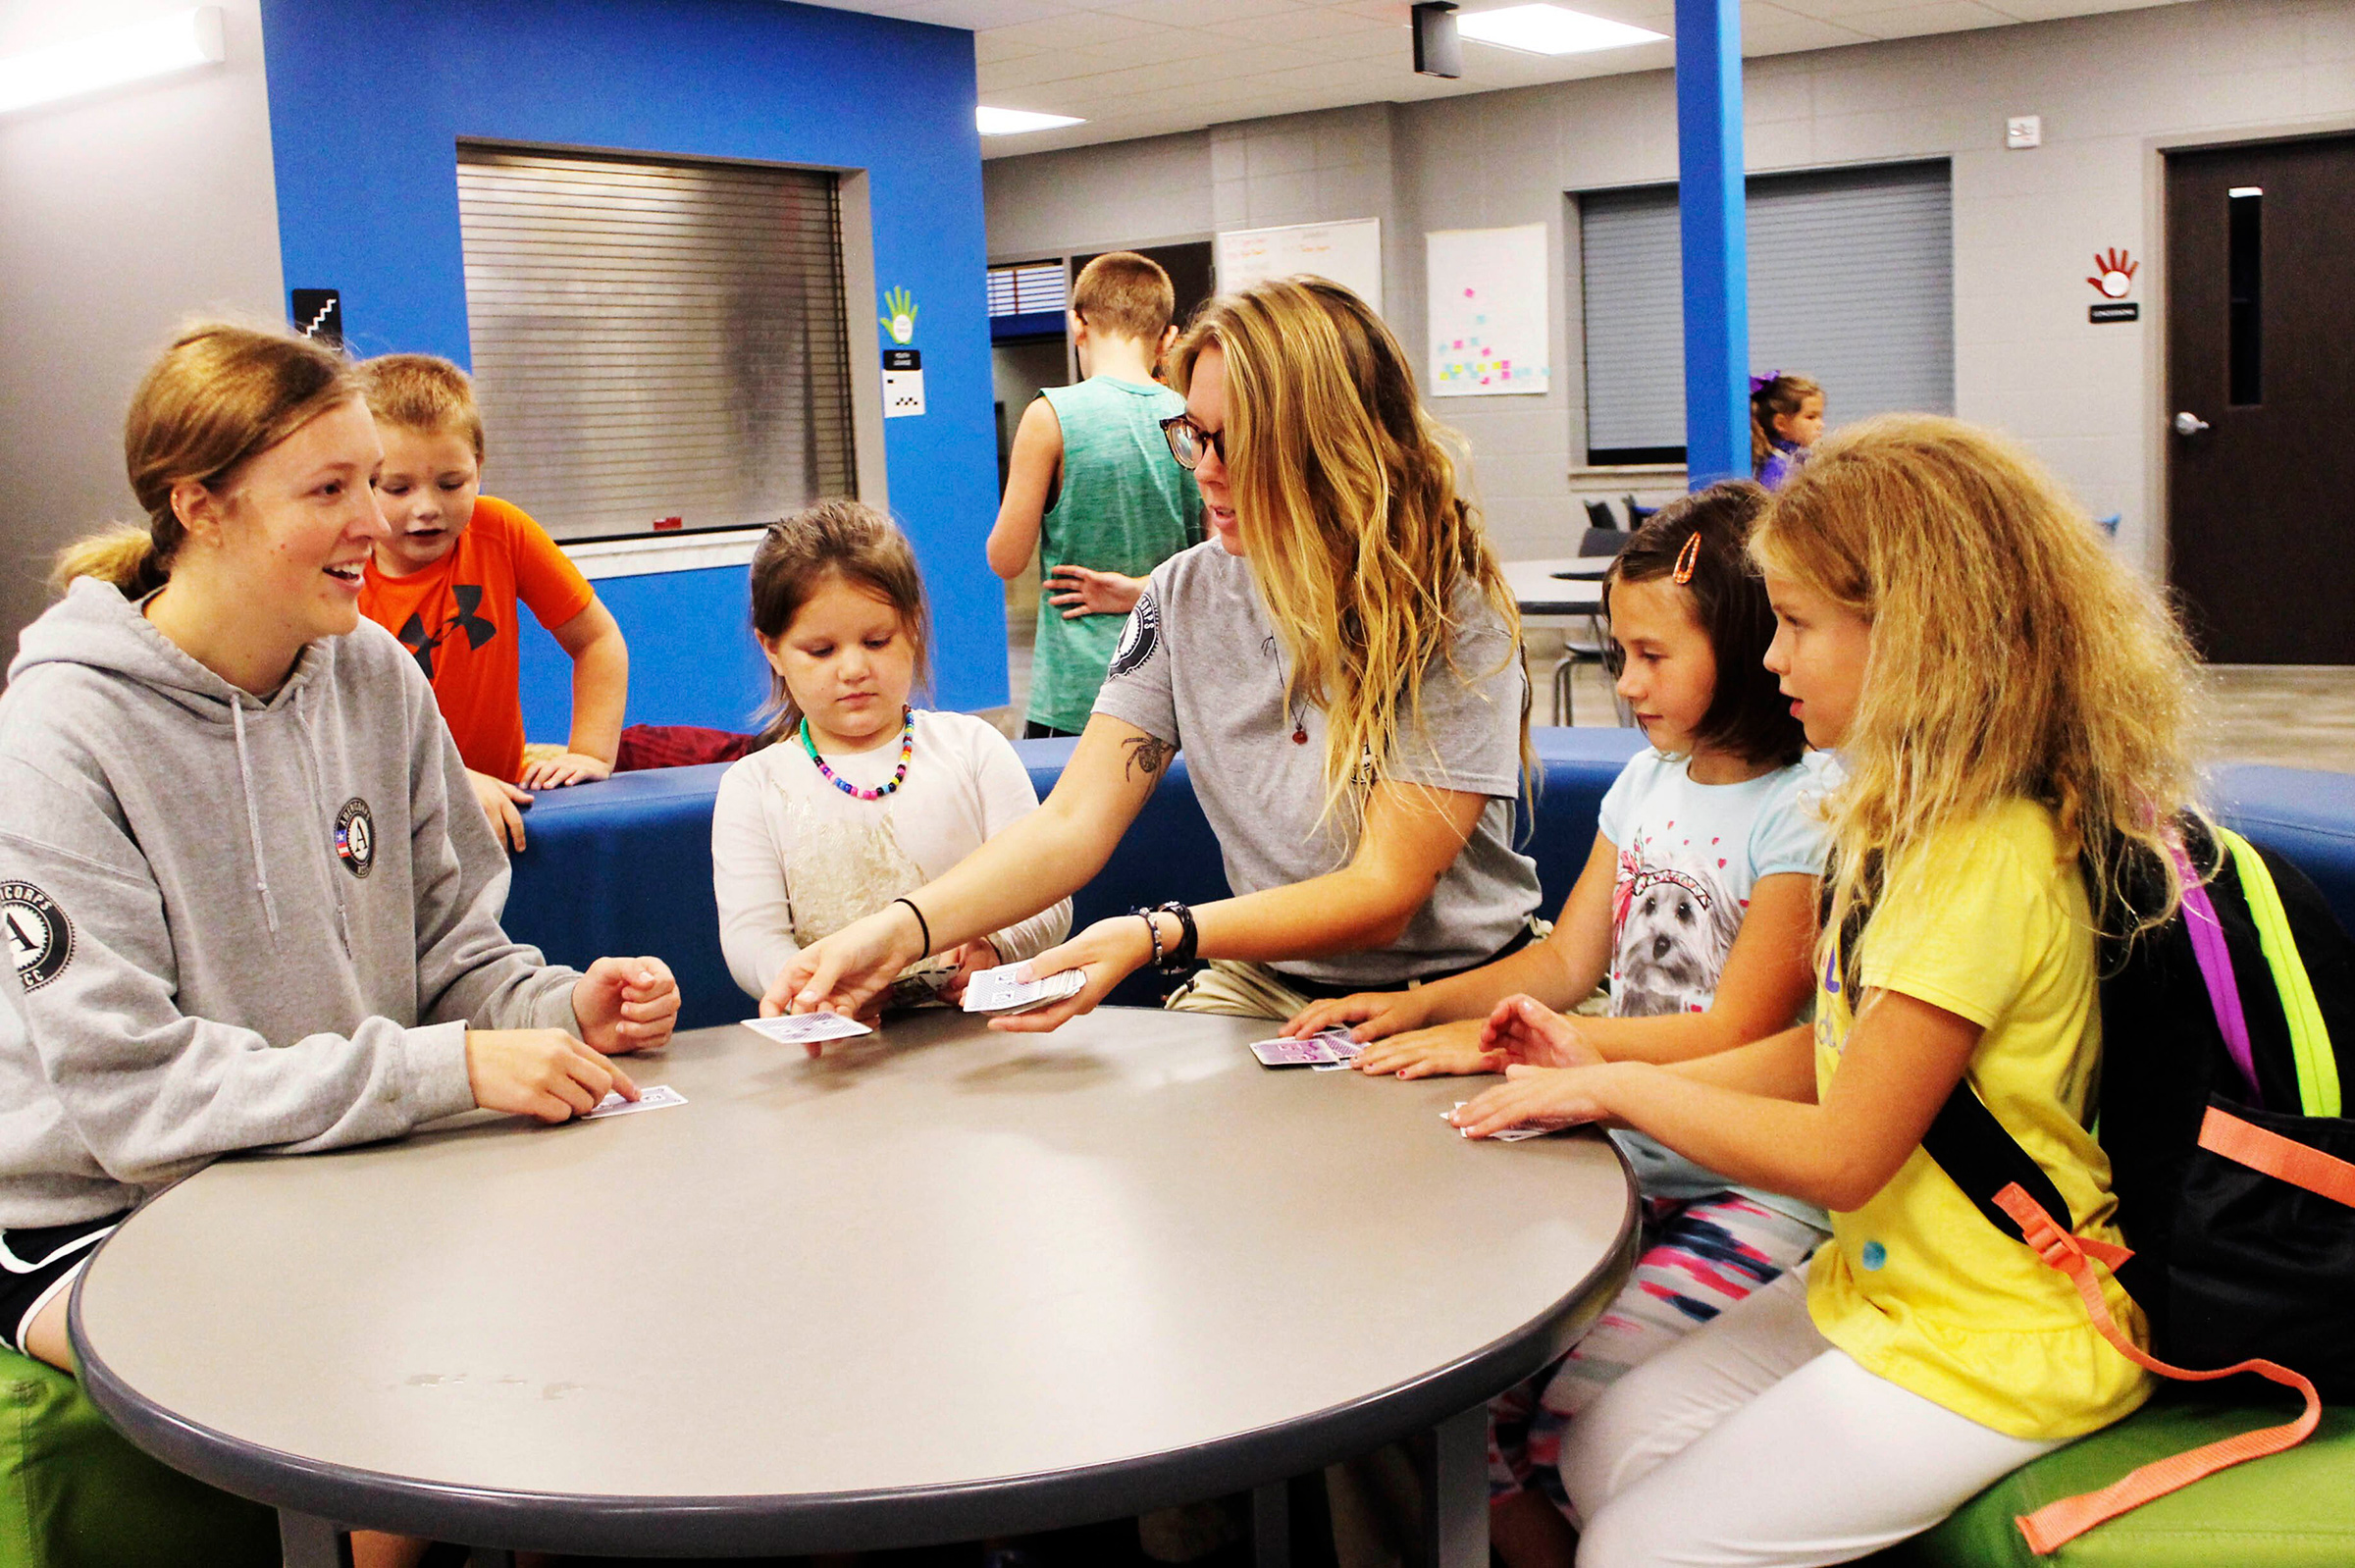 AmeriCorps members play cards with Watertown S.D. Boys and Girls Club members on Aug. 14, 2019. (Dan Crisler—The Public Opinion via AP)